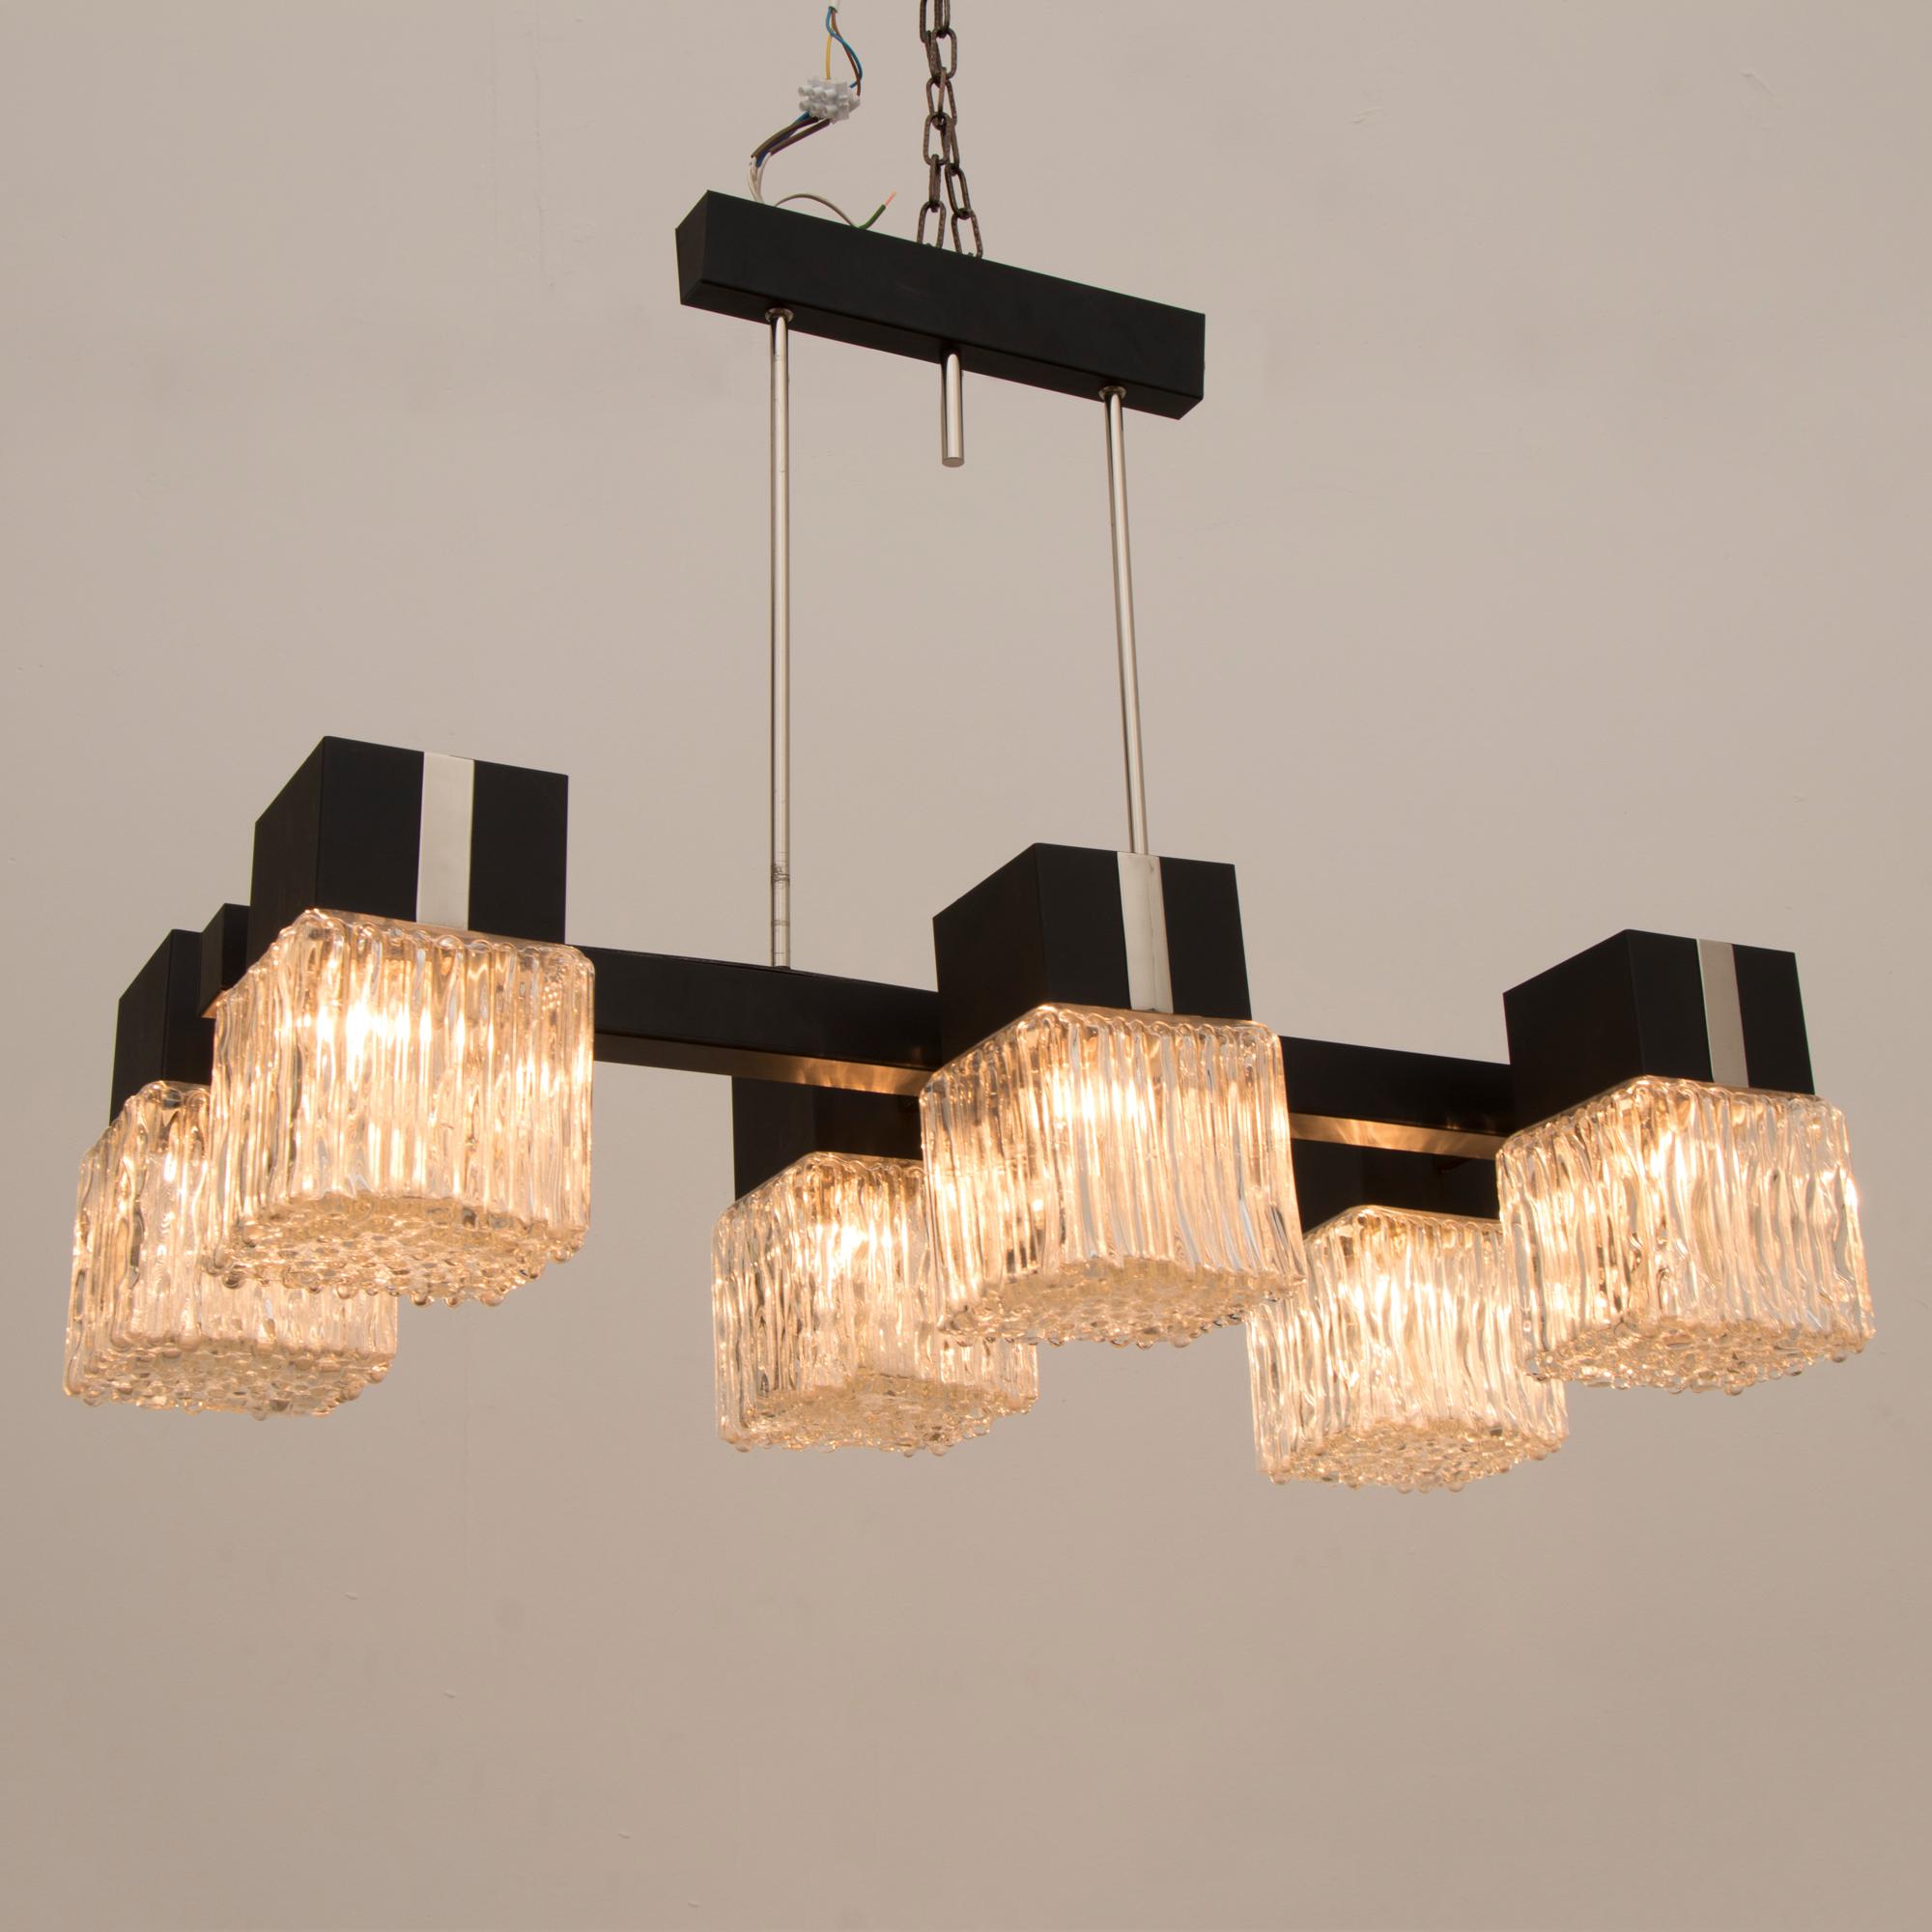 1960s Belgian six square shade hanging light. Each shade hangs from a black lacquered frame with chrome detailing running above each shade. The light is attached to the ceiling from two chrome rods and a black lacquered bar which the wires are